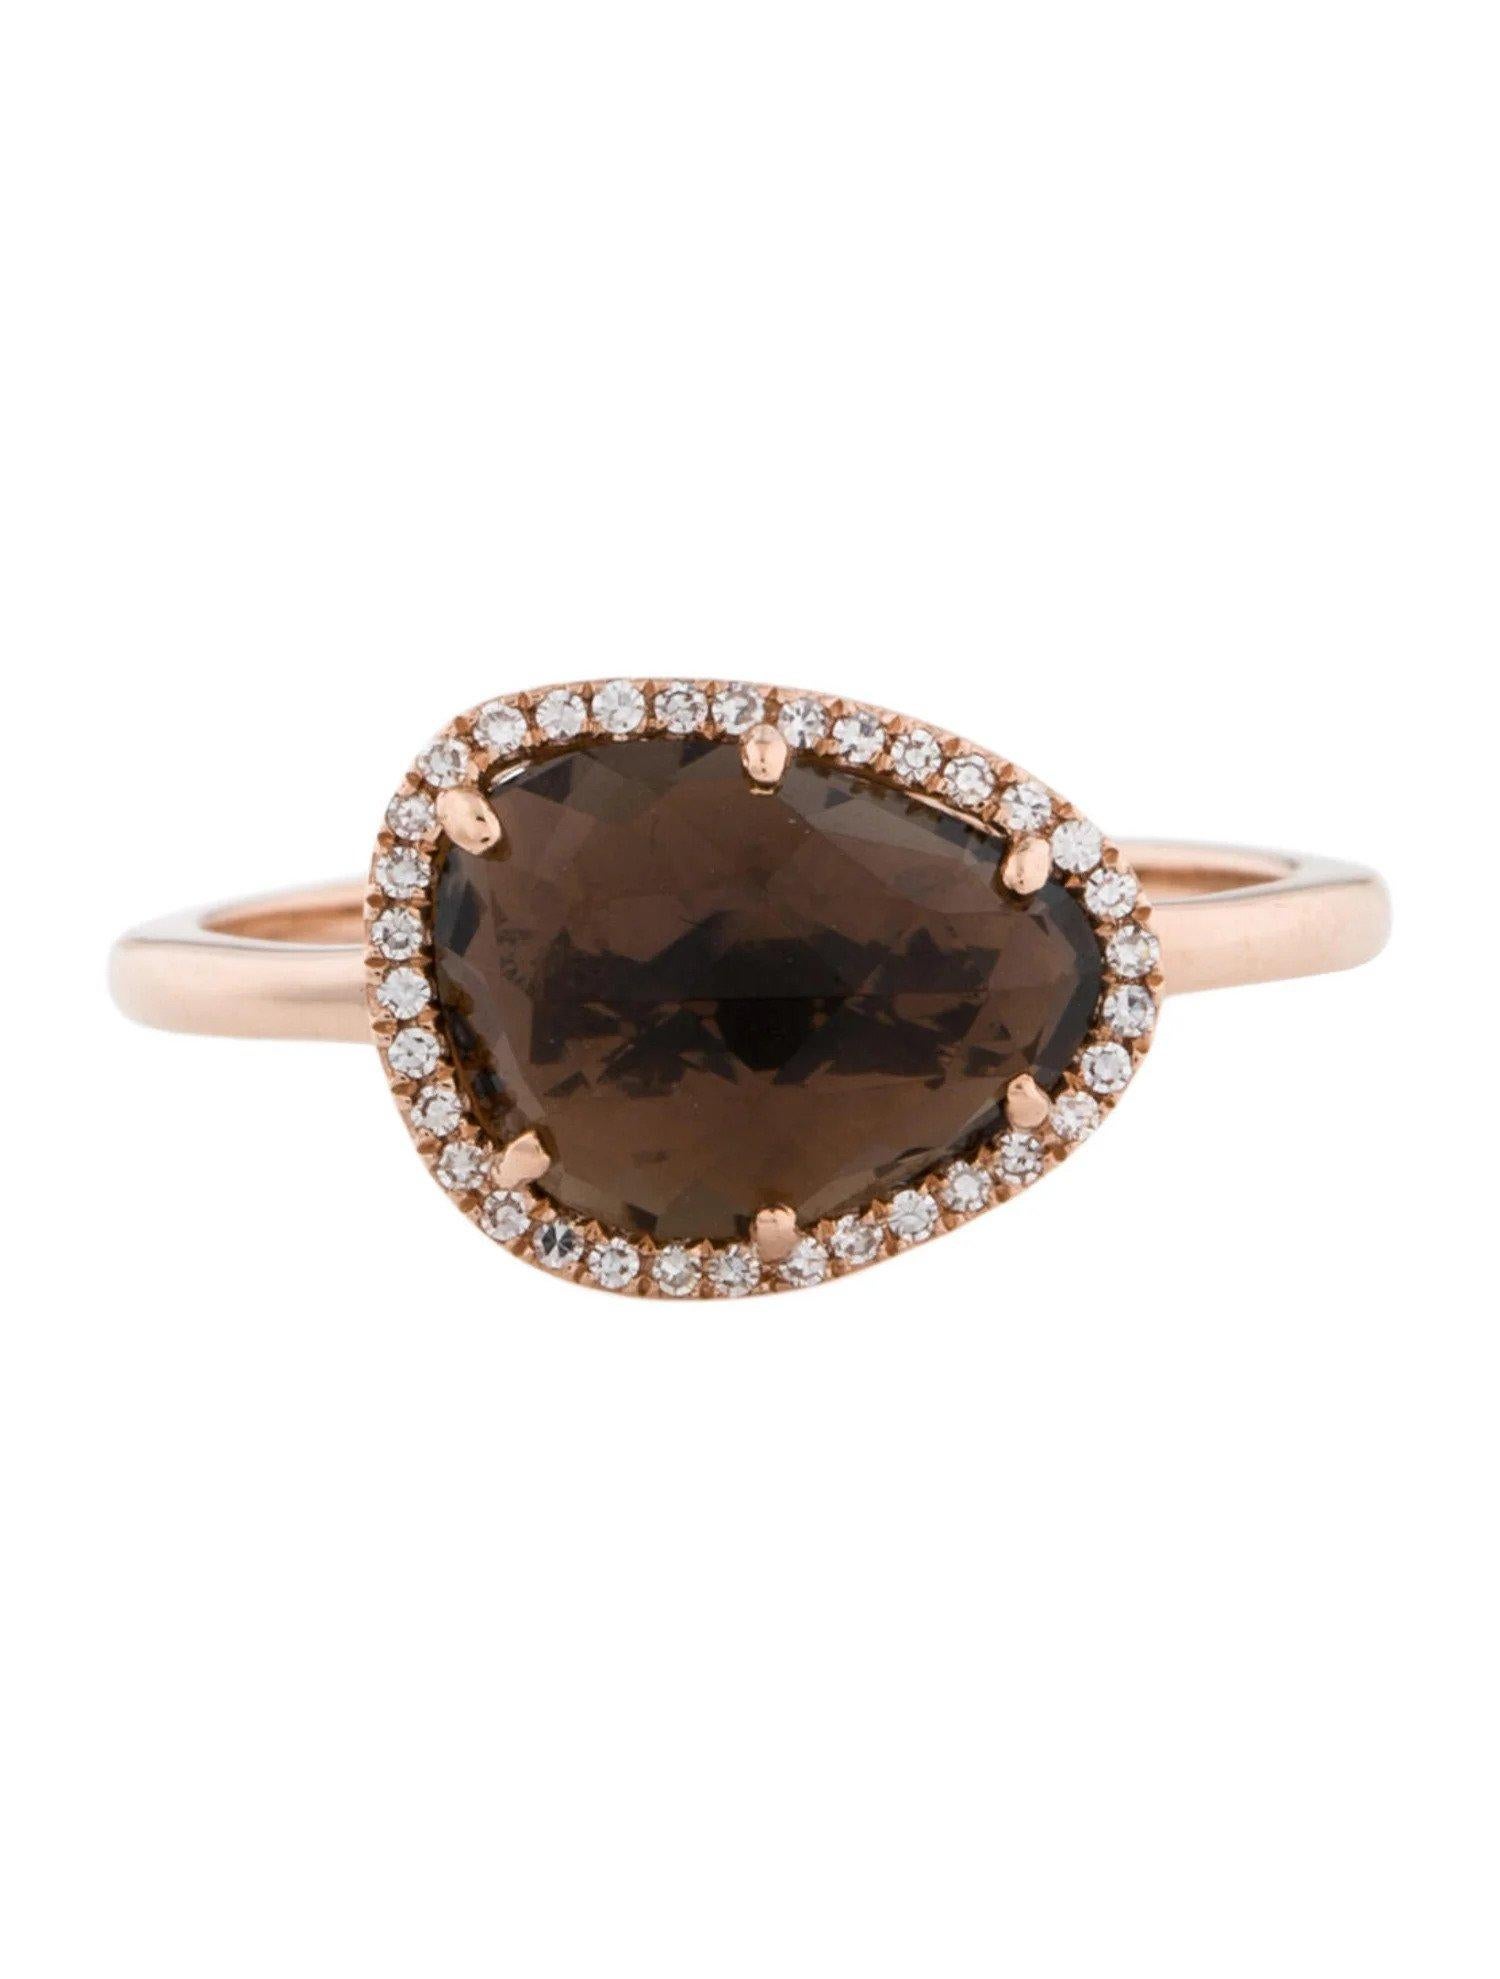 This Smokey Quartz & Diamond Ring is a stunning and timeless accessory that can add a touch of glamour and sophistication to any outfit. 

This ring features a 1.00 Carat Smokey Quartz  (12 x 9 MM), with a Diamond Halo comprised of 0.08 Carats of